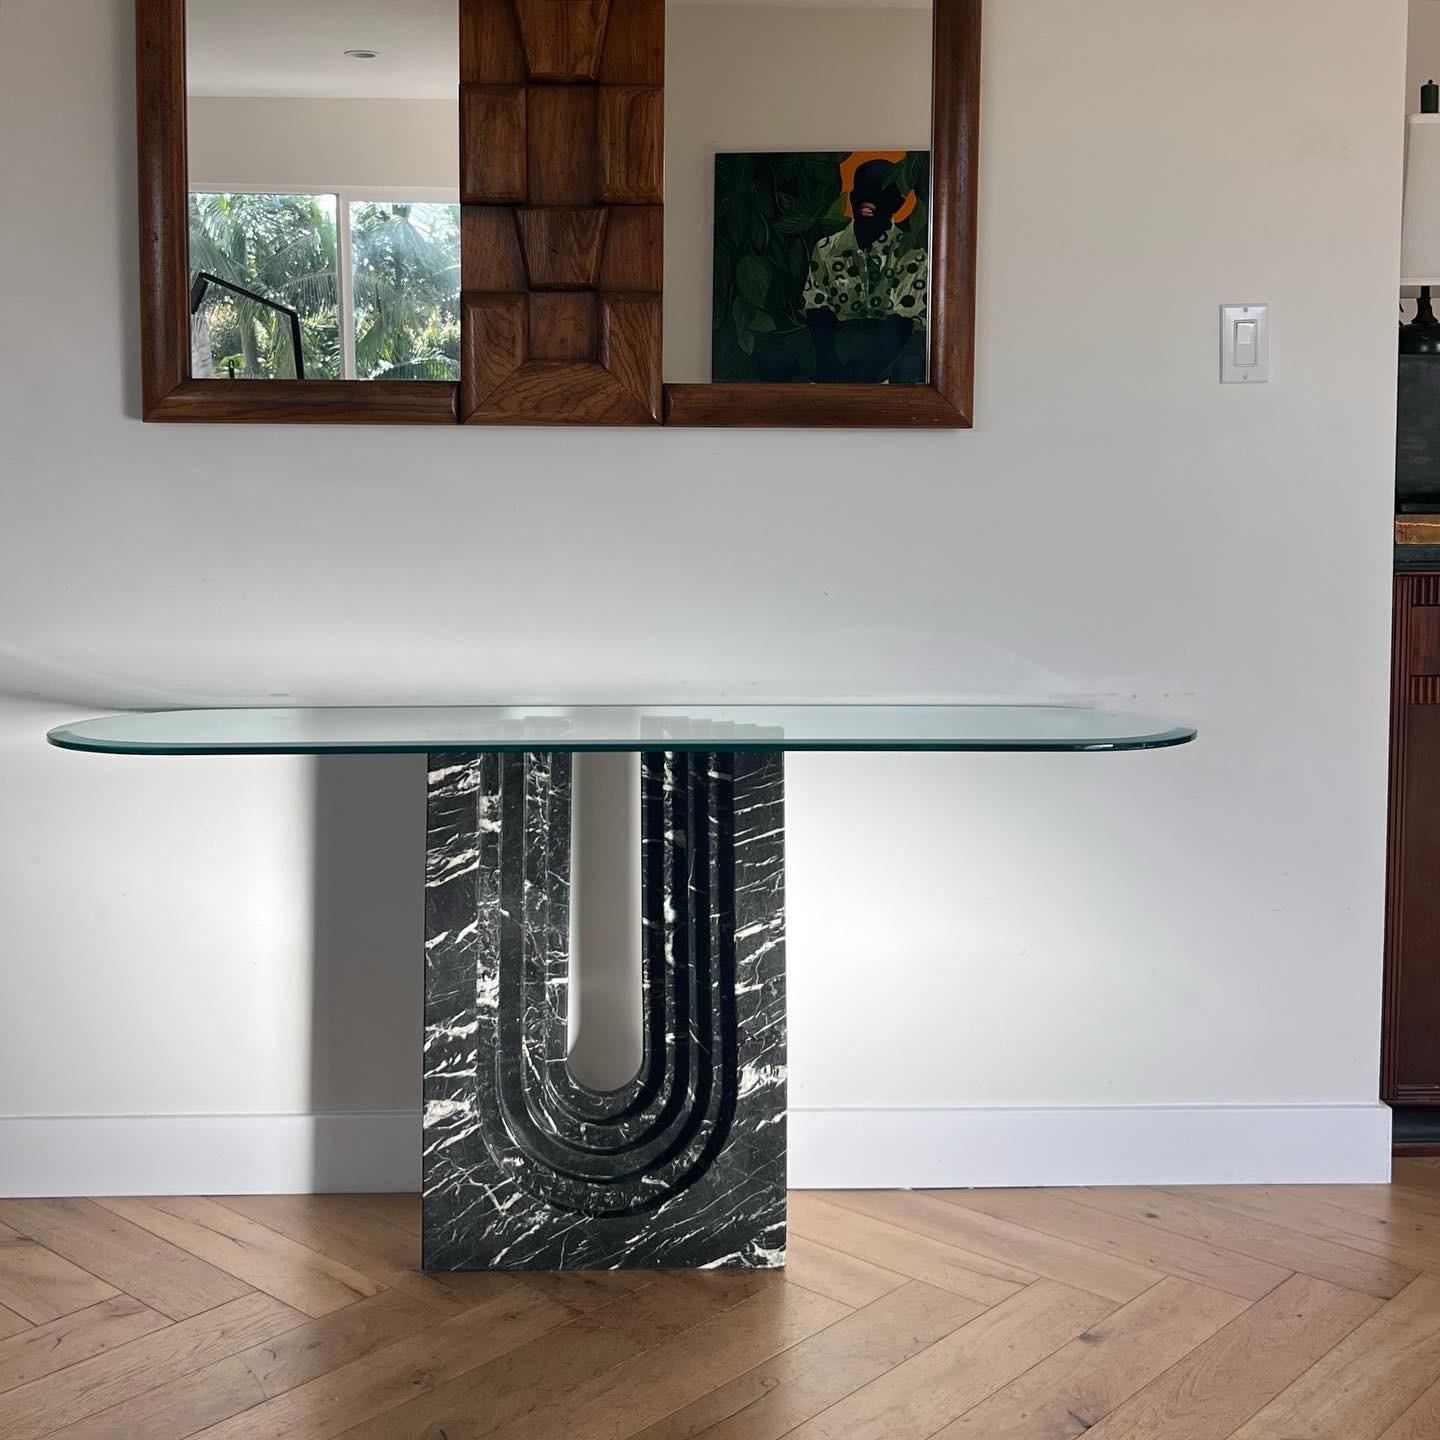 20th Century “Naxos” marble and glass console table by Cattelan Italia, 1988